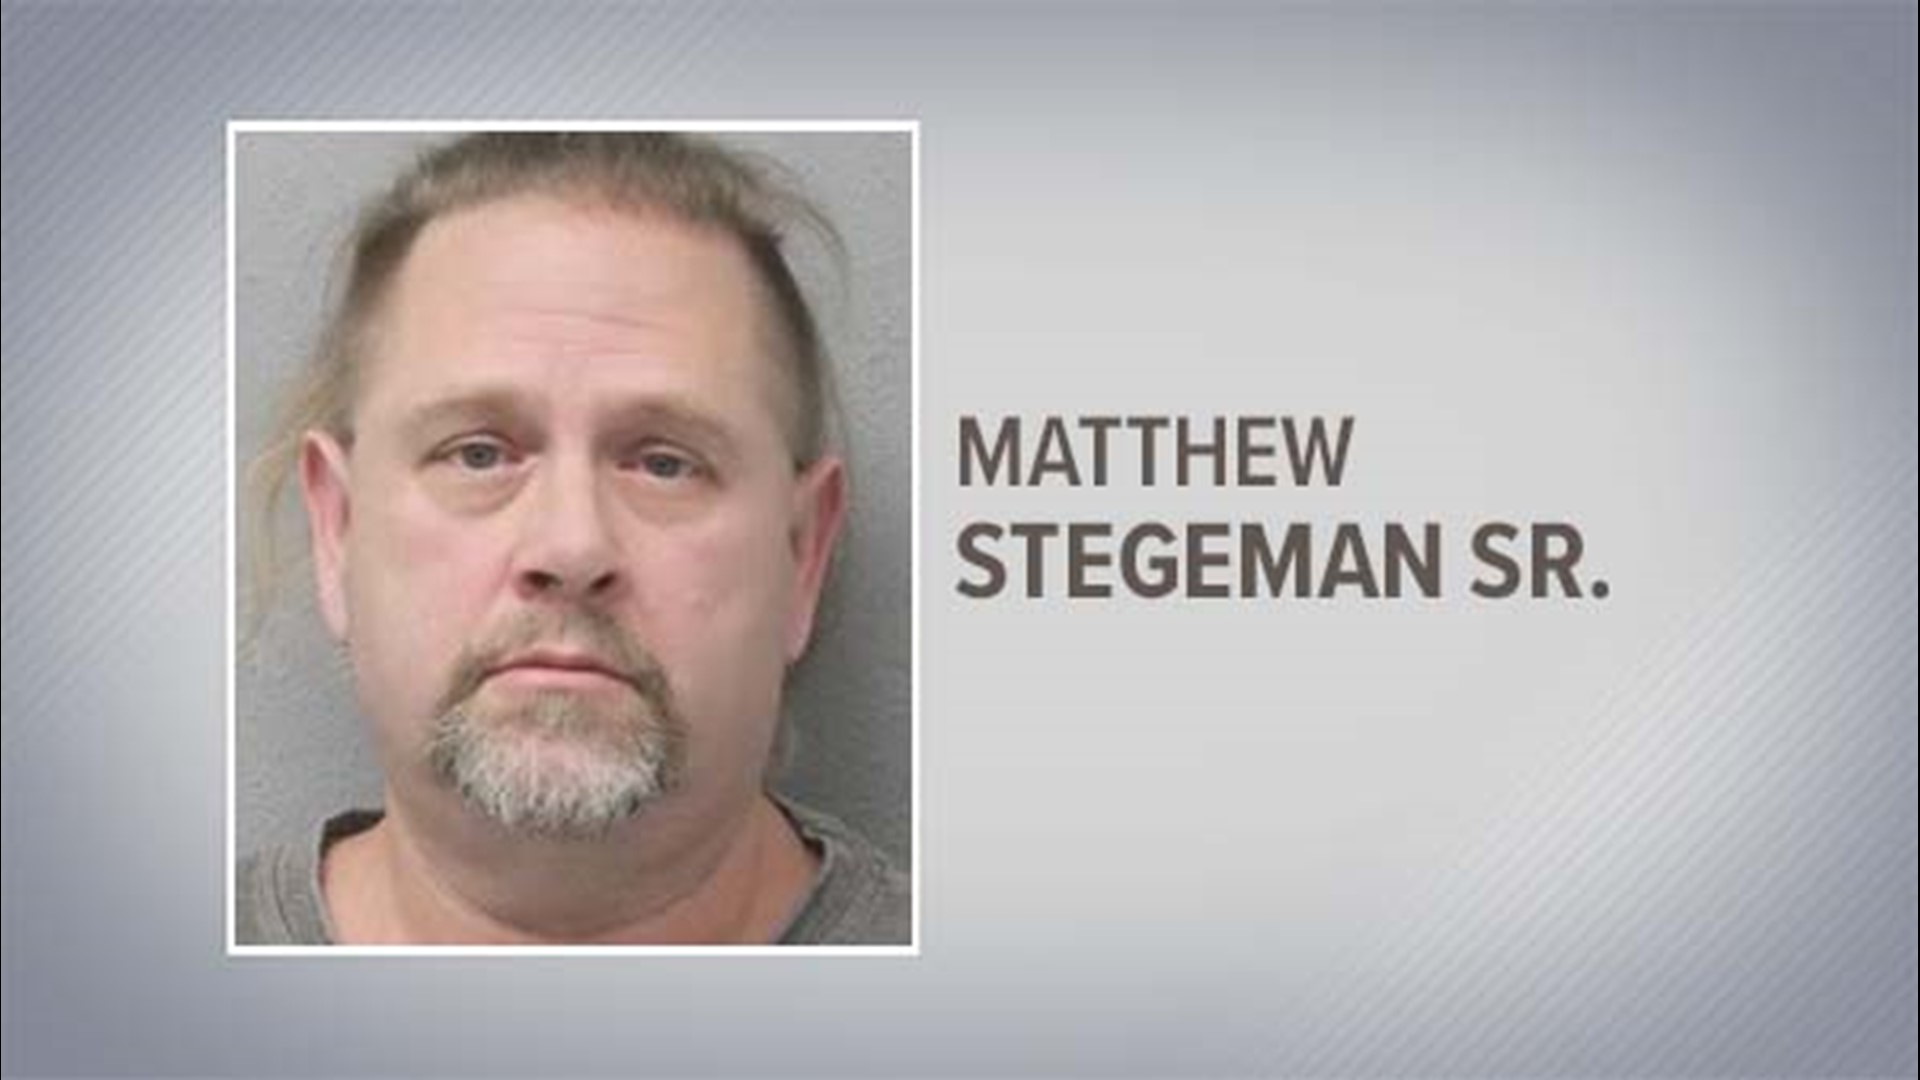 Matthew Stegeman Sr., 52, was arrested Monday and charged with indecency with a child by sexual contact. He's been fired from Epps Island Elementary.